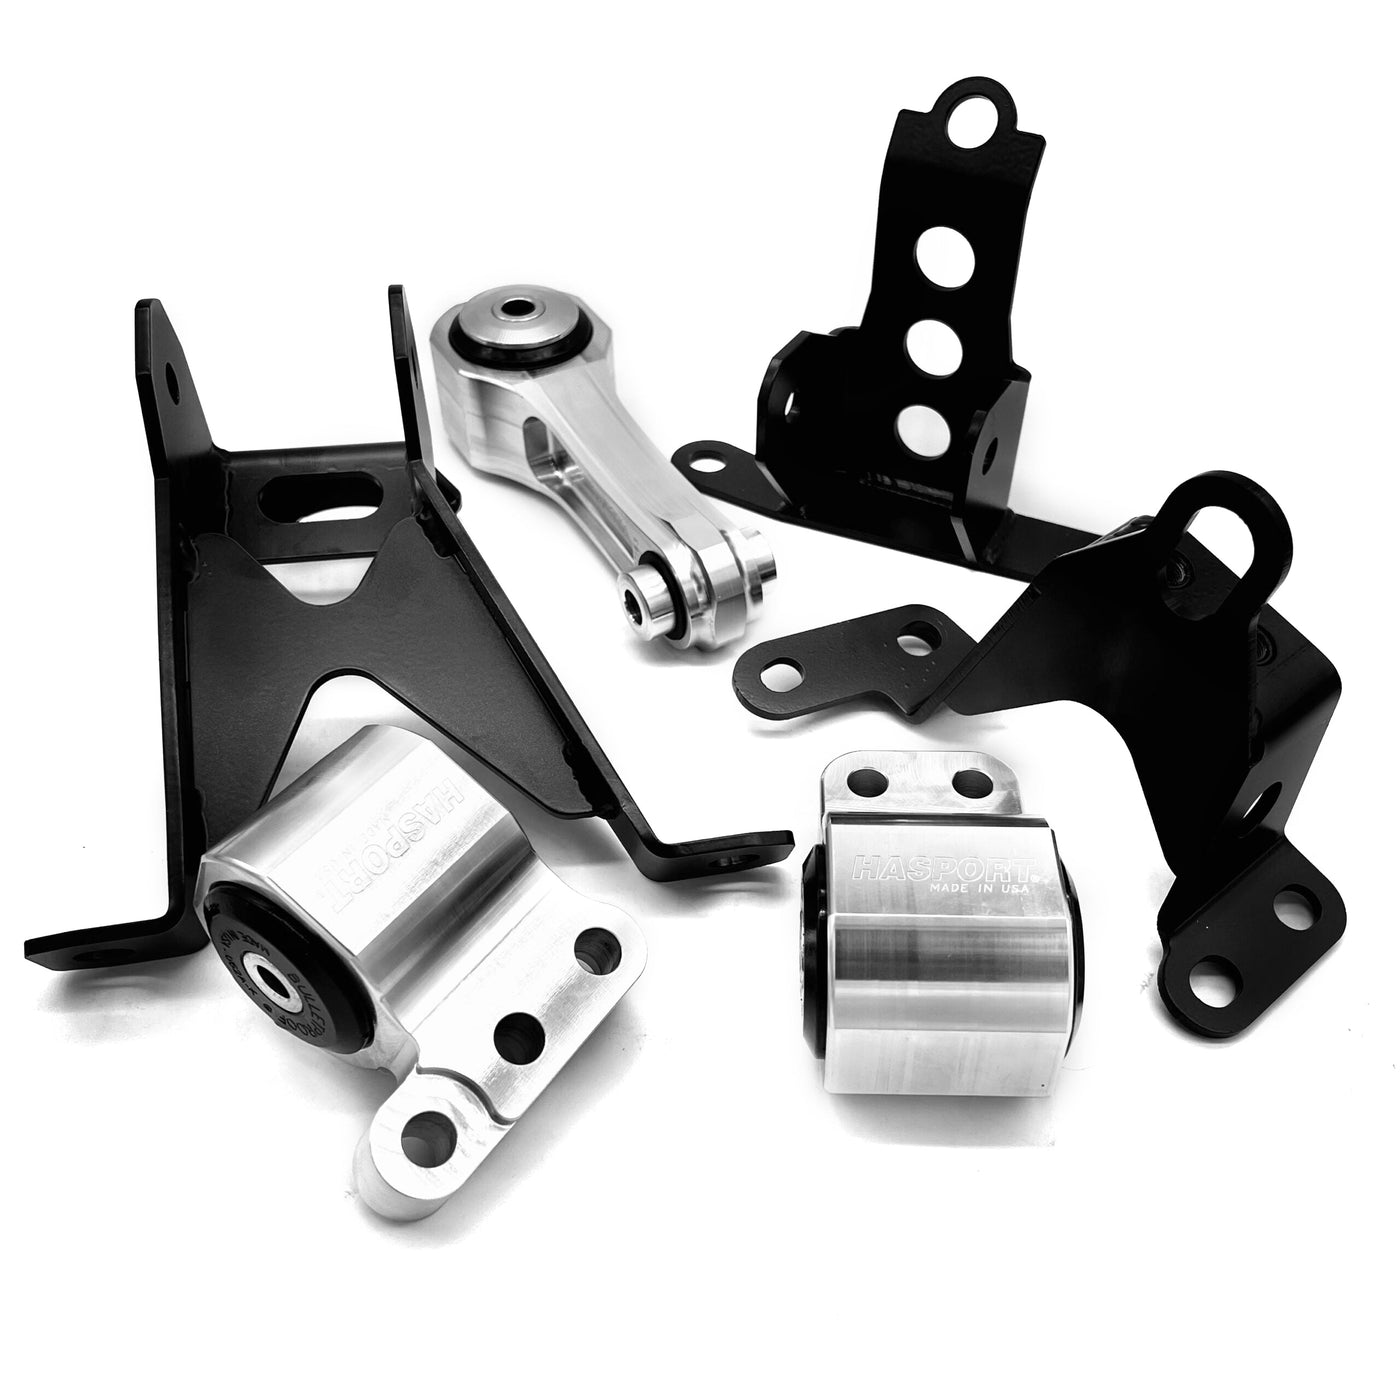 Hasport Performance Stock Replacement Engine Mount Kit for 22+ Civic